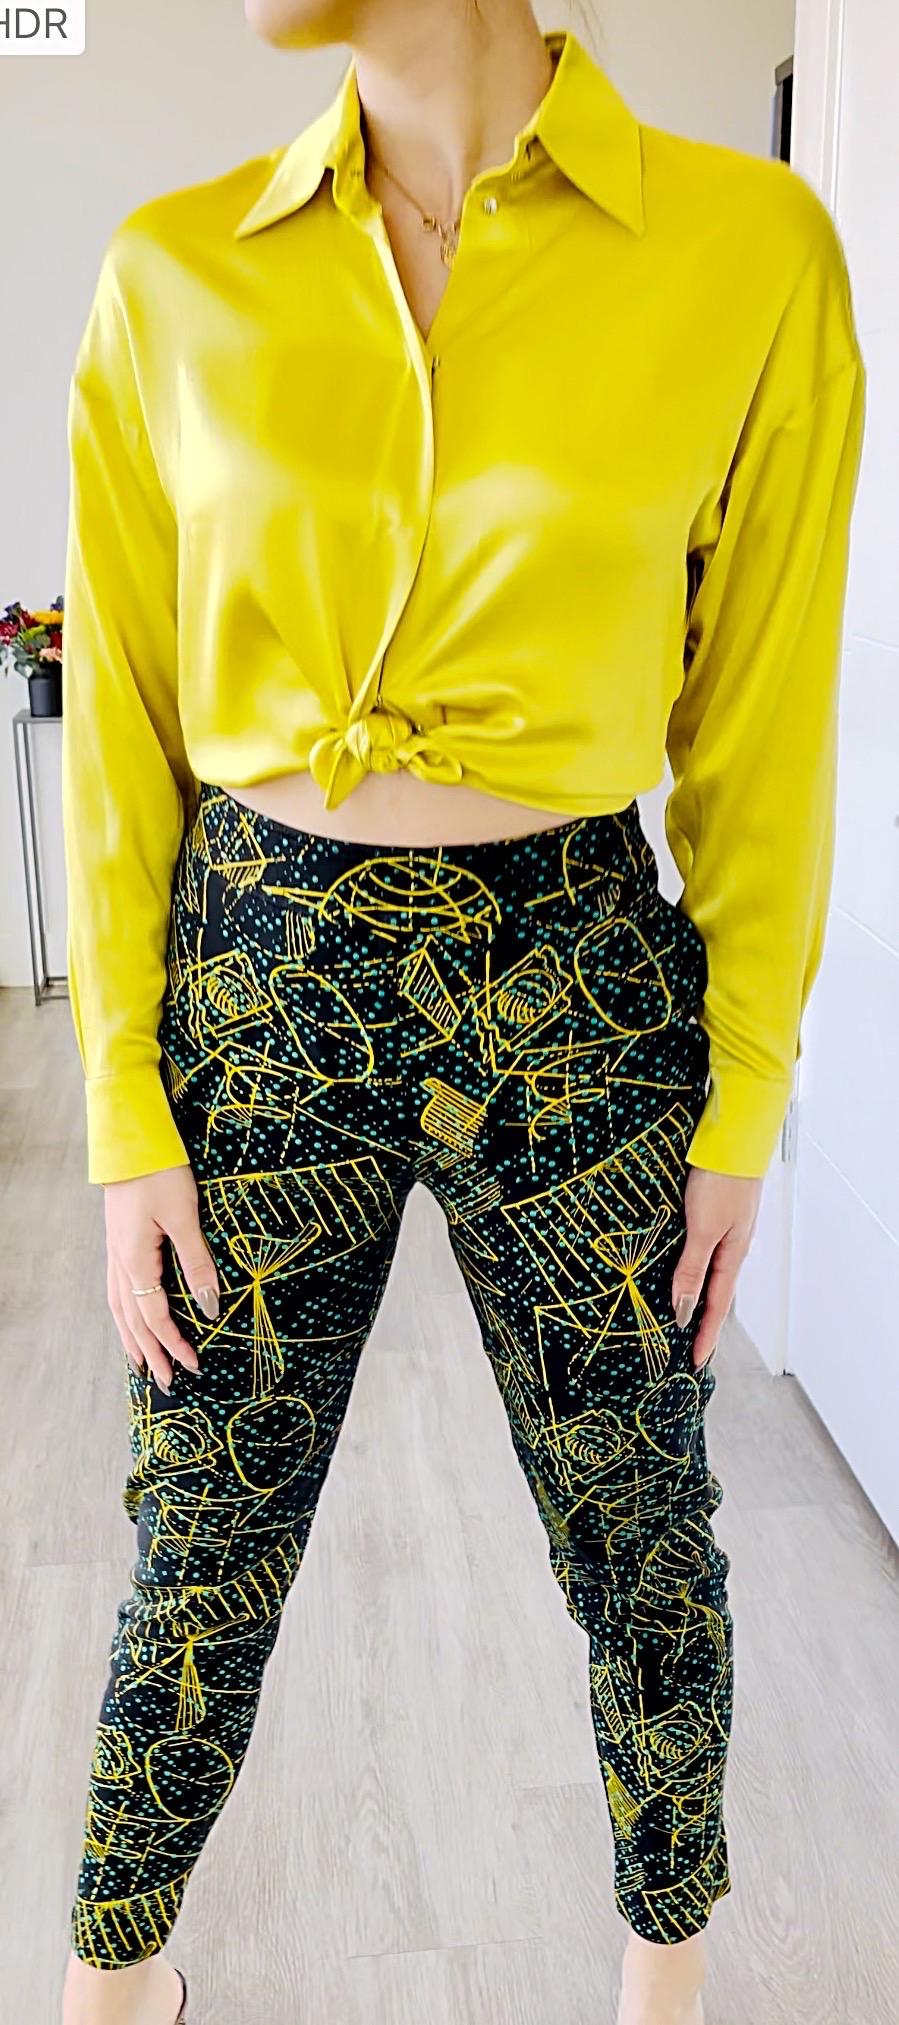 Rare Herve Leger 1980s Hand Painted High Waisted Galaxy Print Cigarette Pants For Sale 10